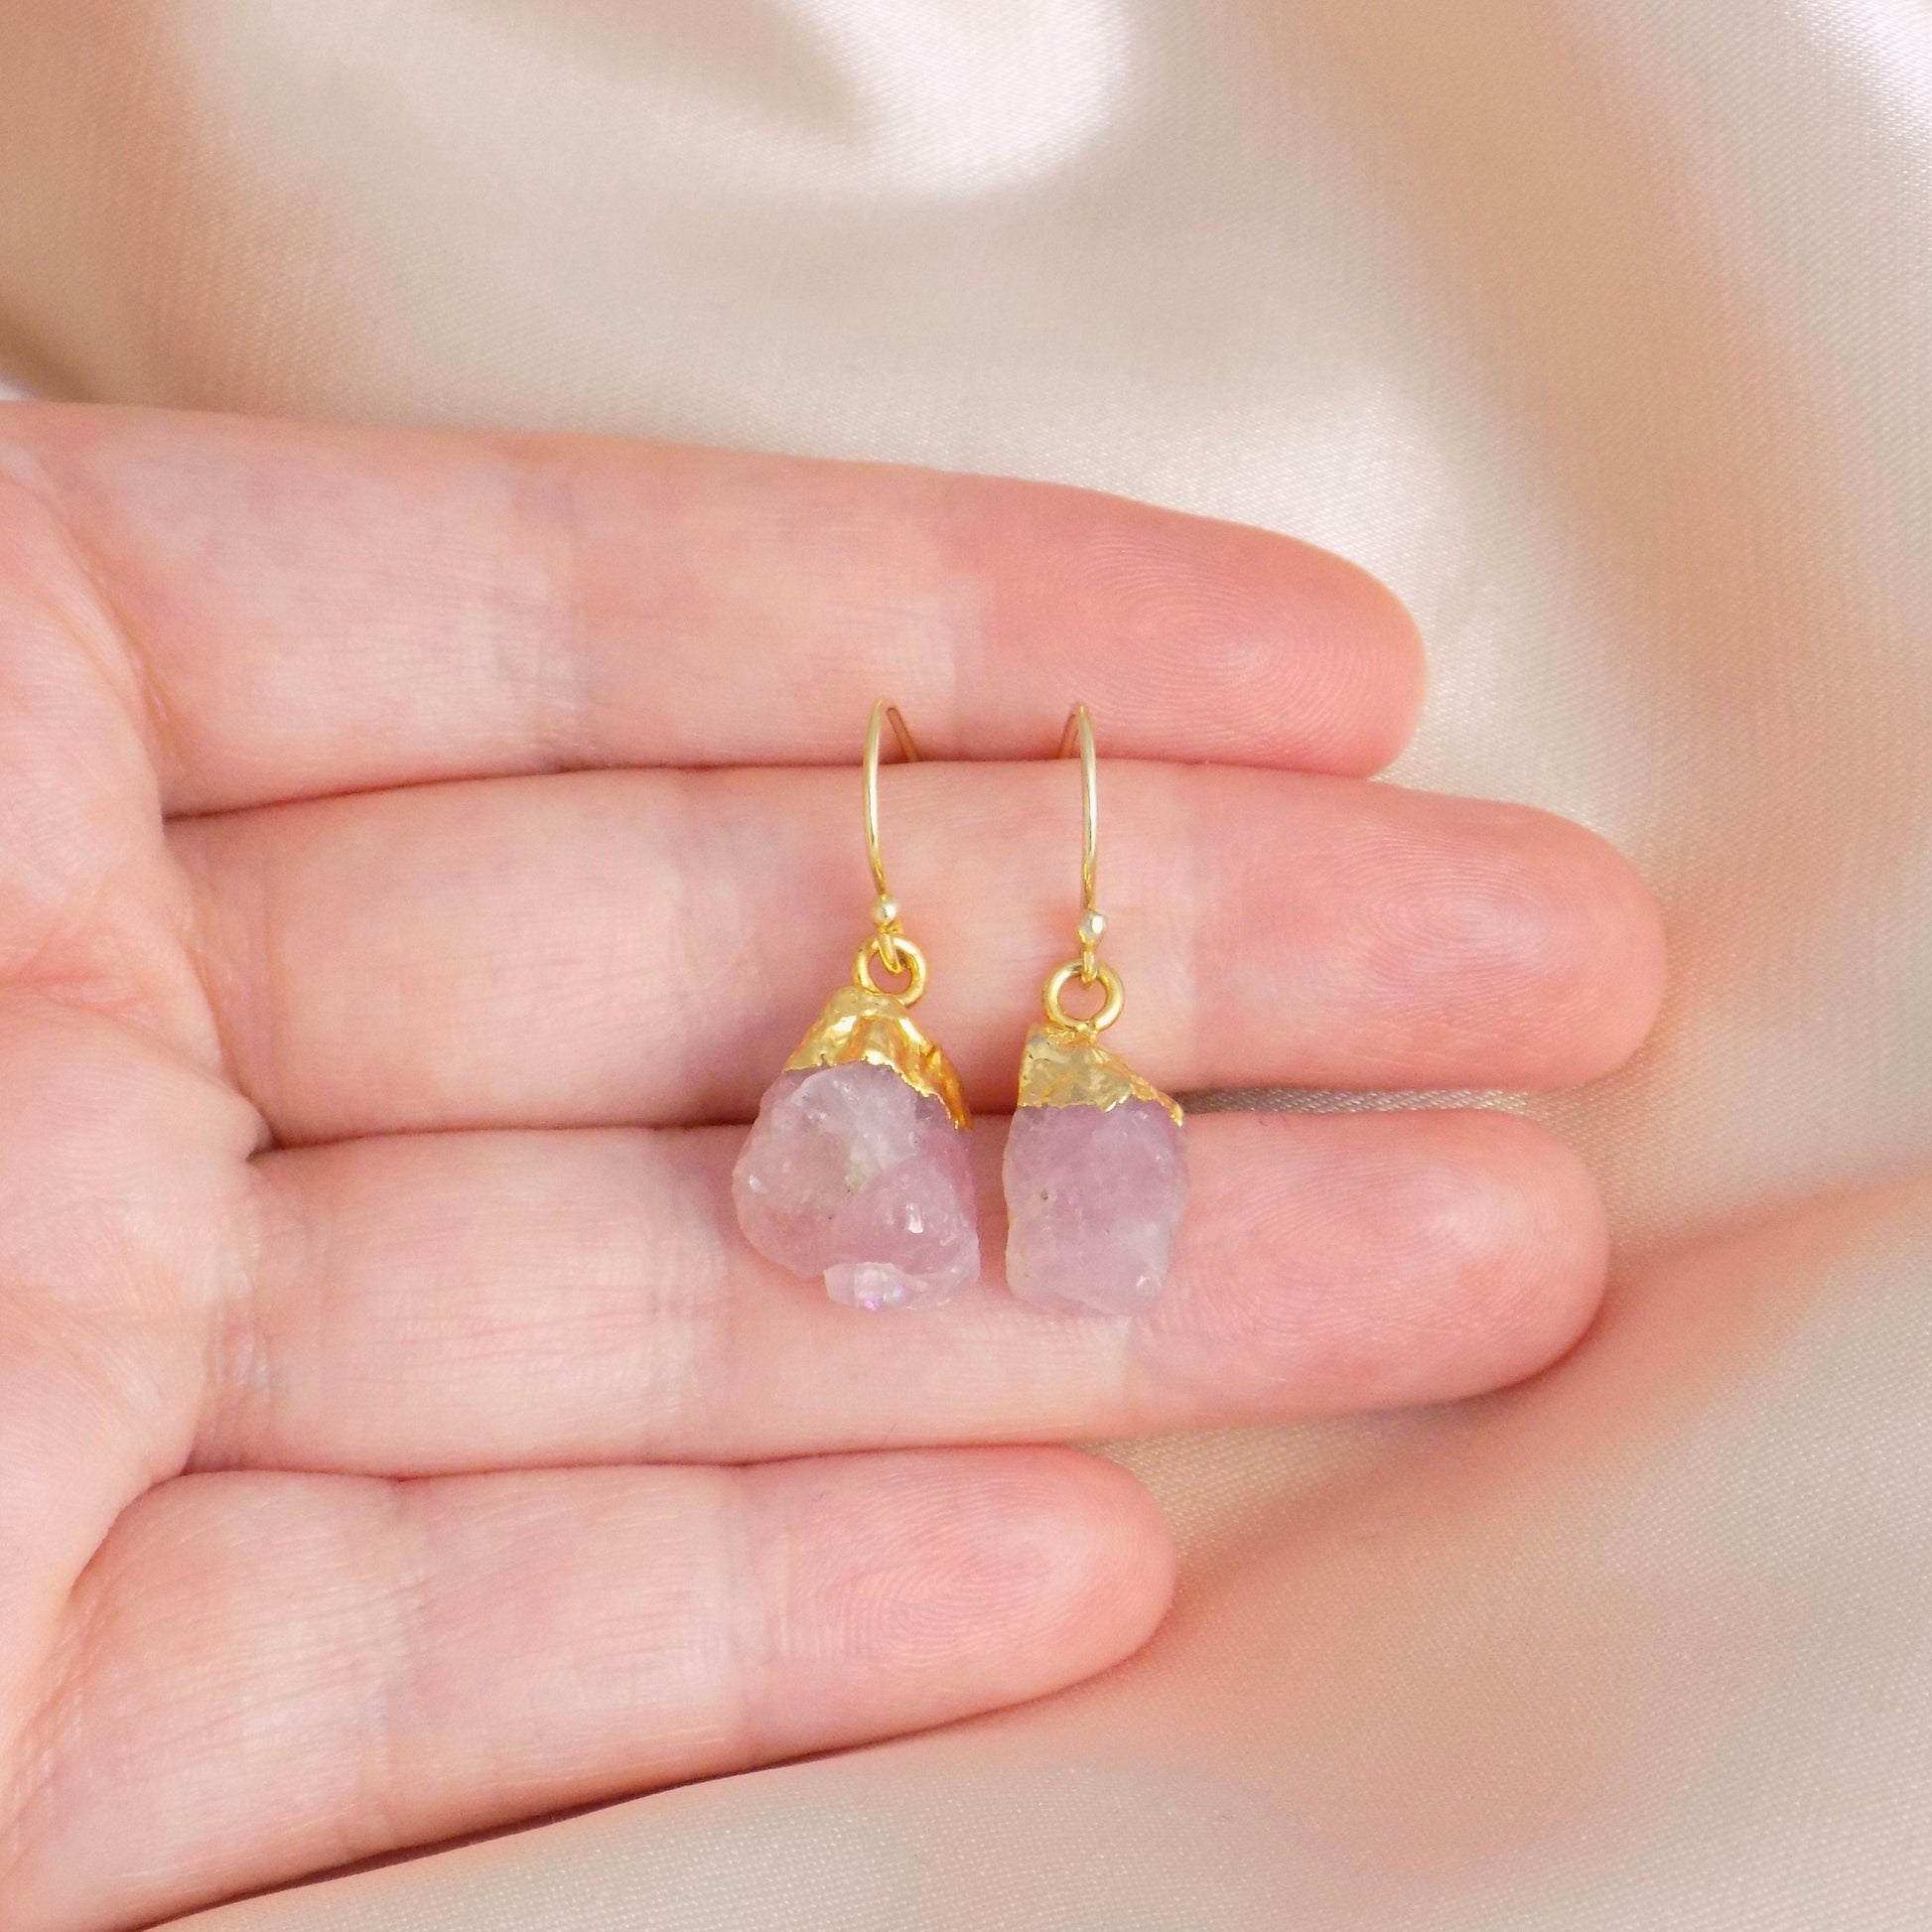 Raw Rose Quartz Earrings Gold, October Birthstone, Light Pink Chunky Stone Earring, Heart Chakra Crystals, Christmas Gifts Women, M6-727